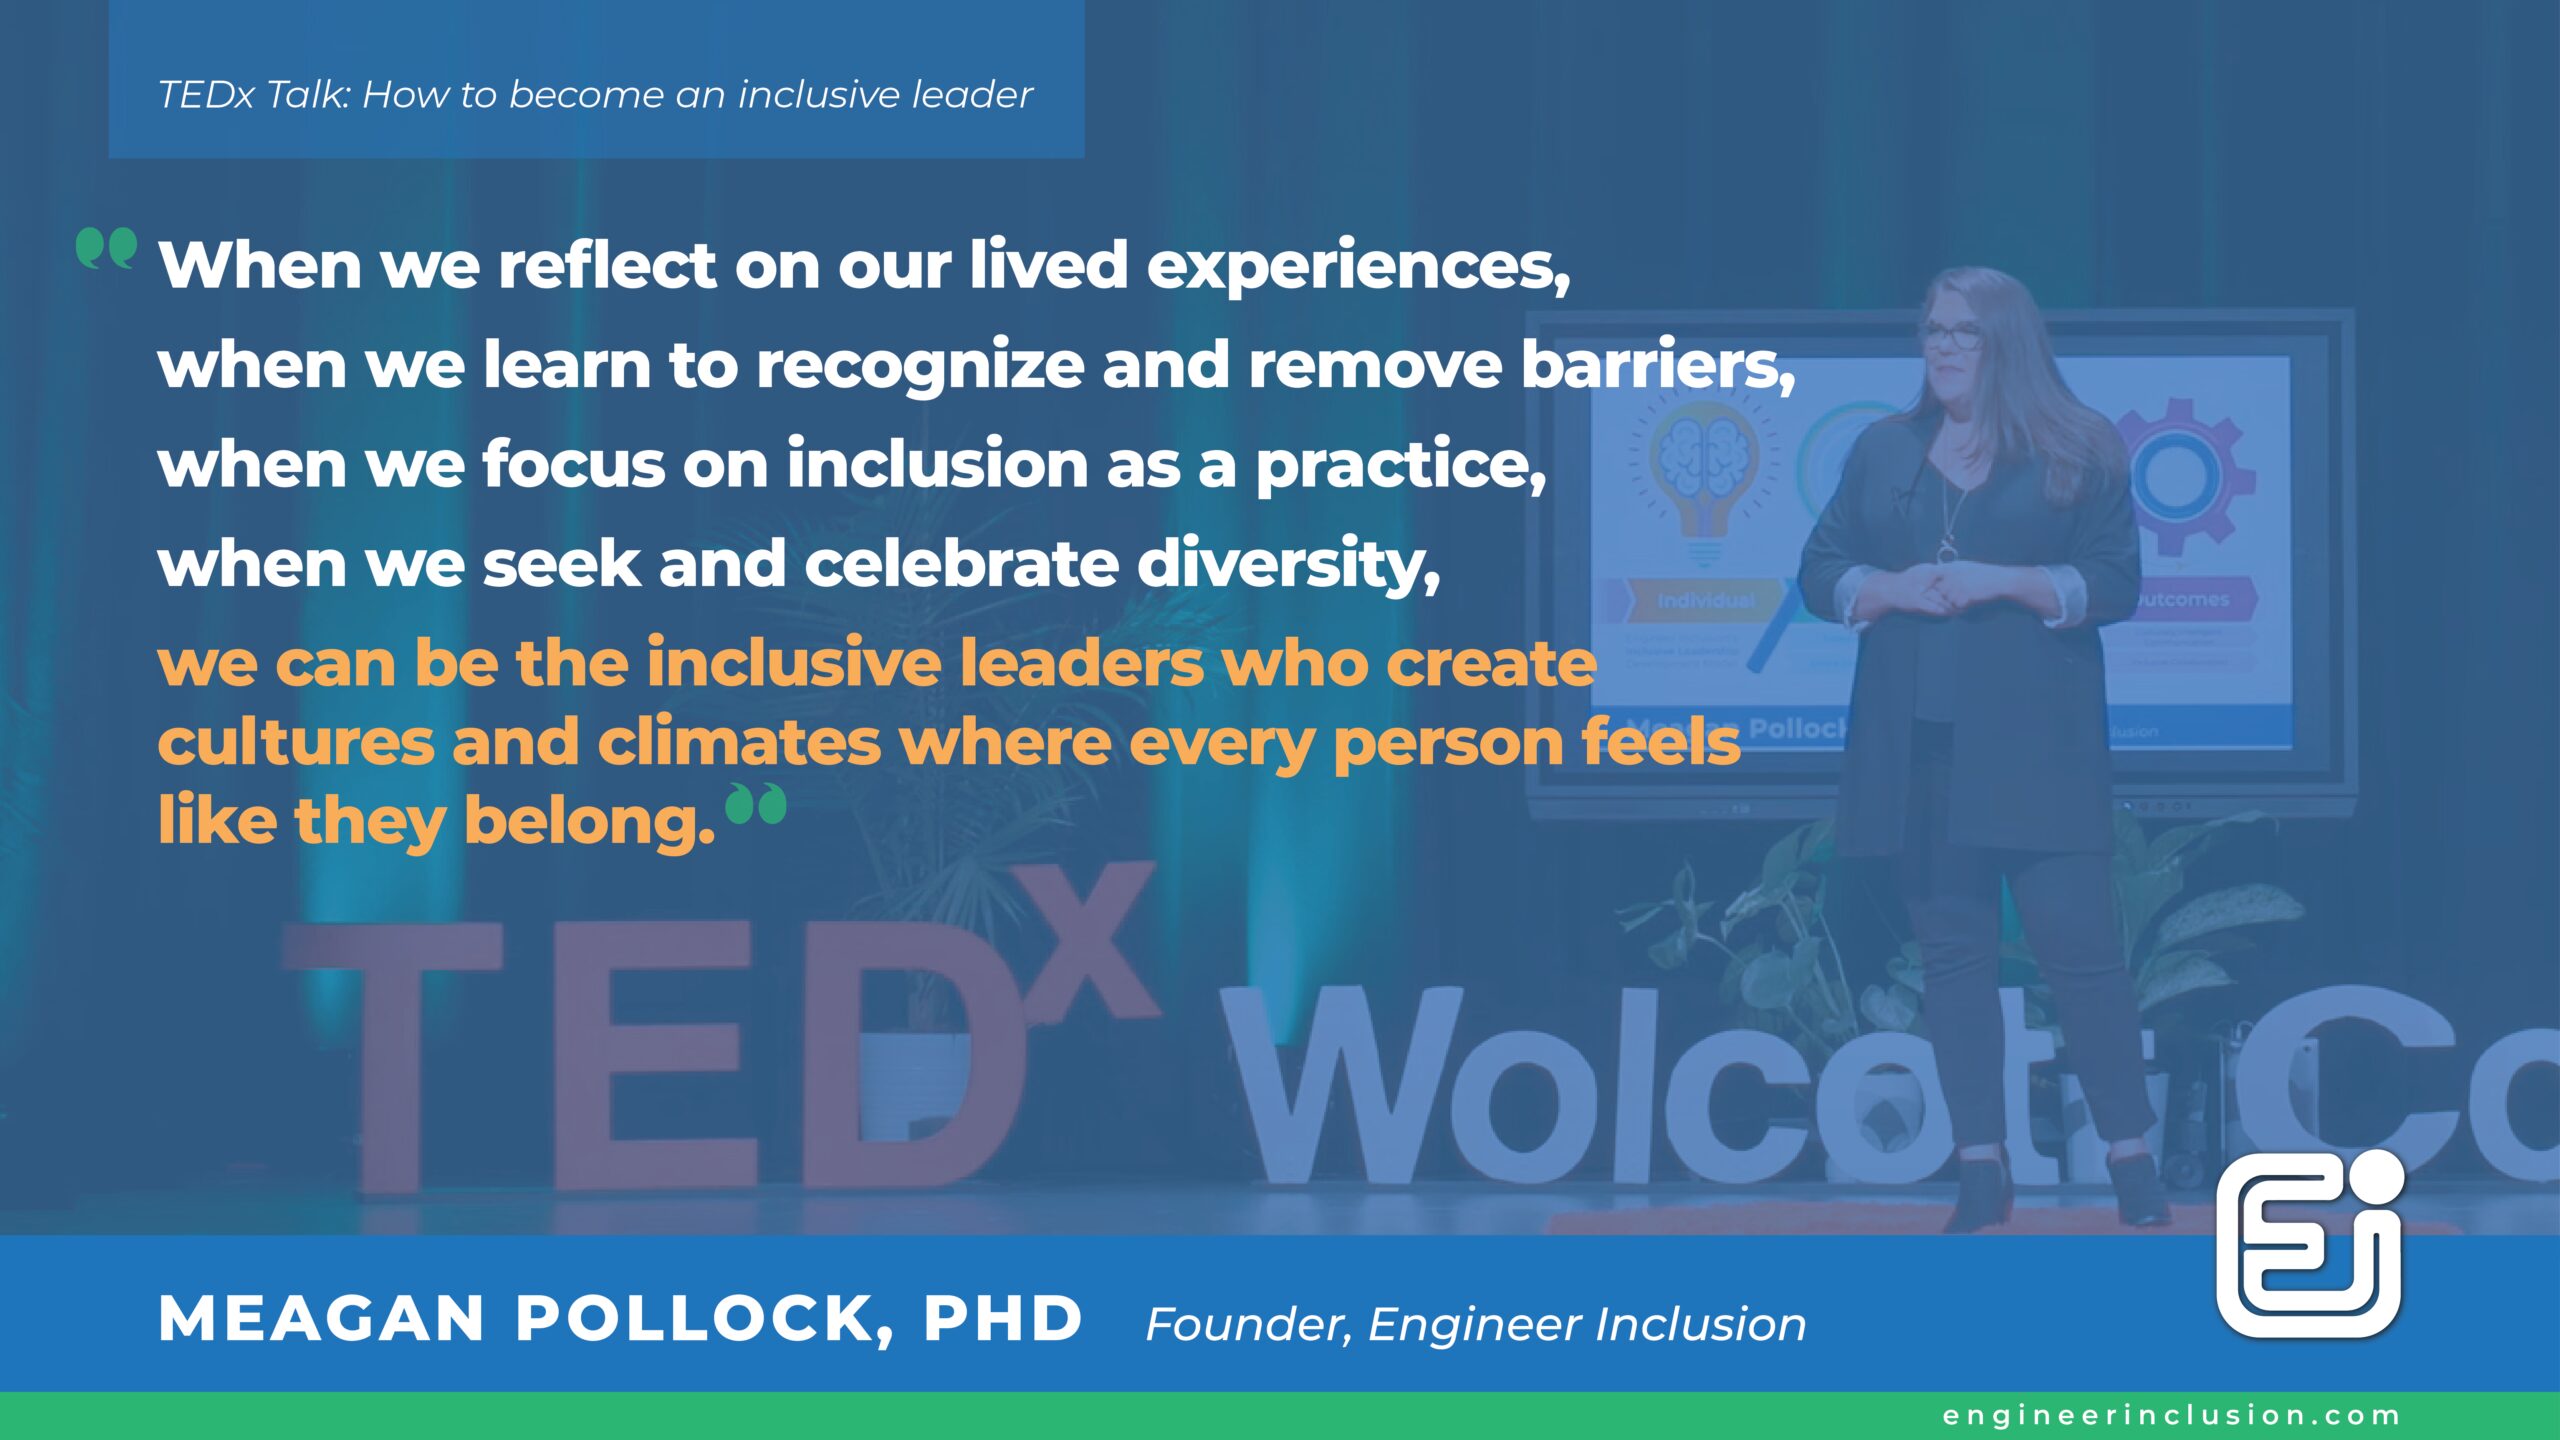 When we reflect on our lived experiences, when we learn to recognize and remove barriers, when we focus on inclusion as a practice, when we seek and celebrate diversity, we can be the inclusive leaders who create cultures and climates where every person feels like they belong. Dr. Meagan Pollock